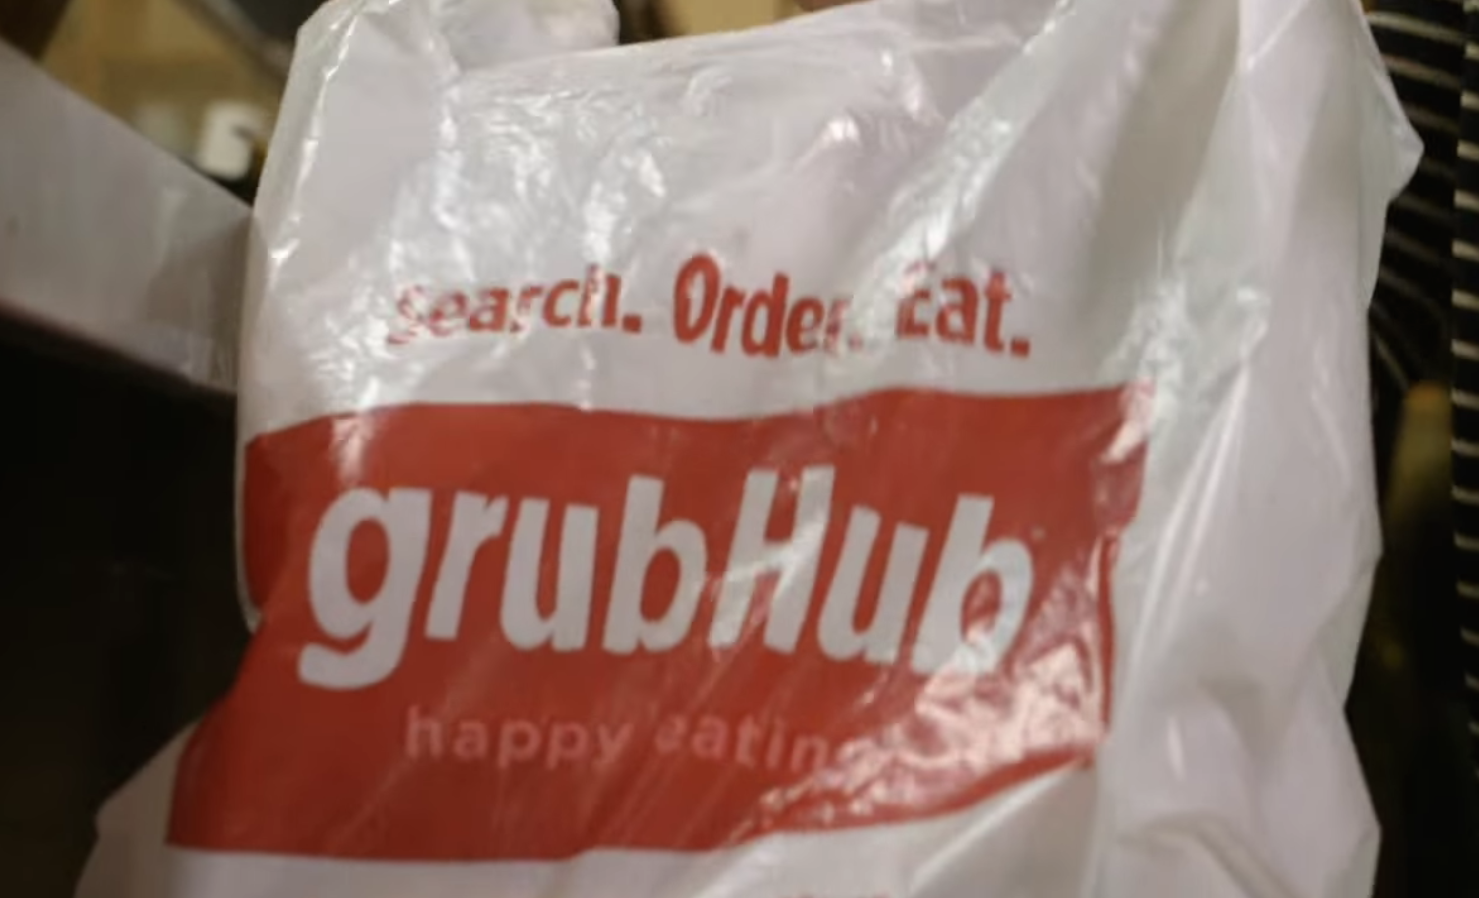 GrubHub/Seamless Hates Its Customers, Strips Them Of Legal Right To Sue